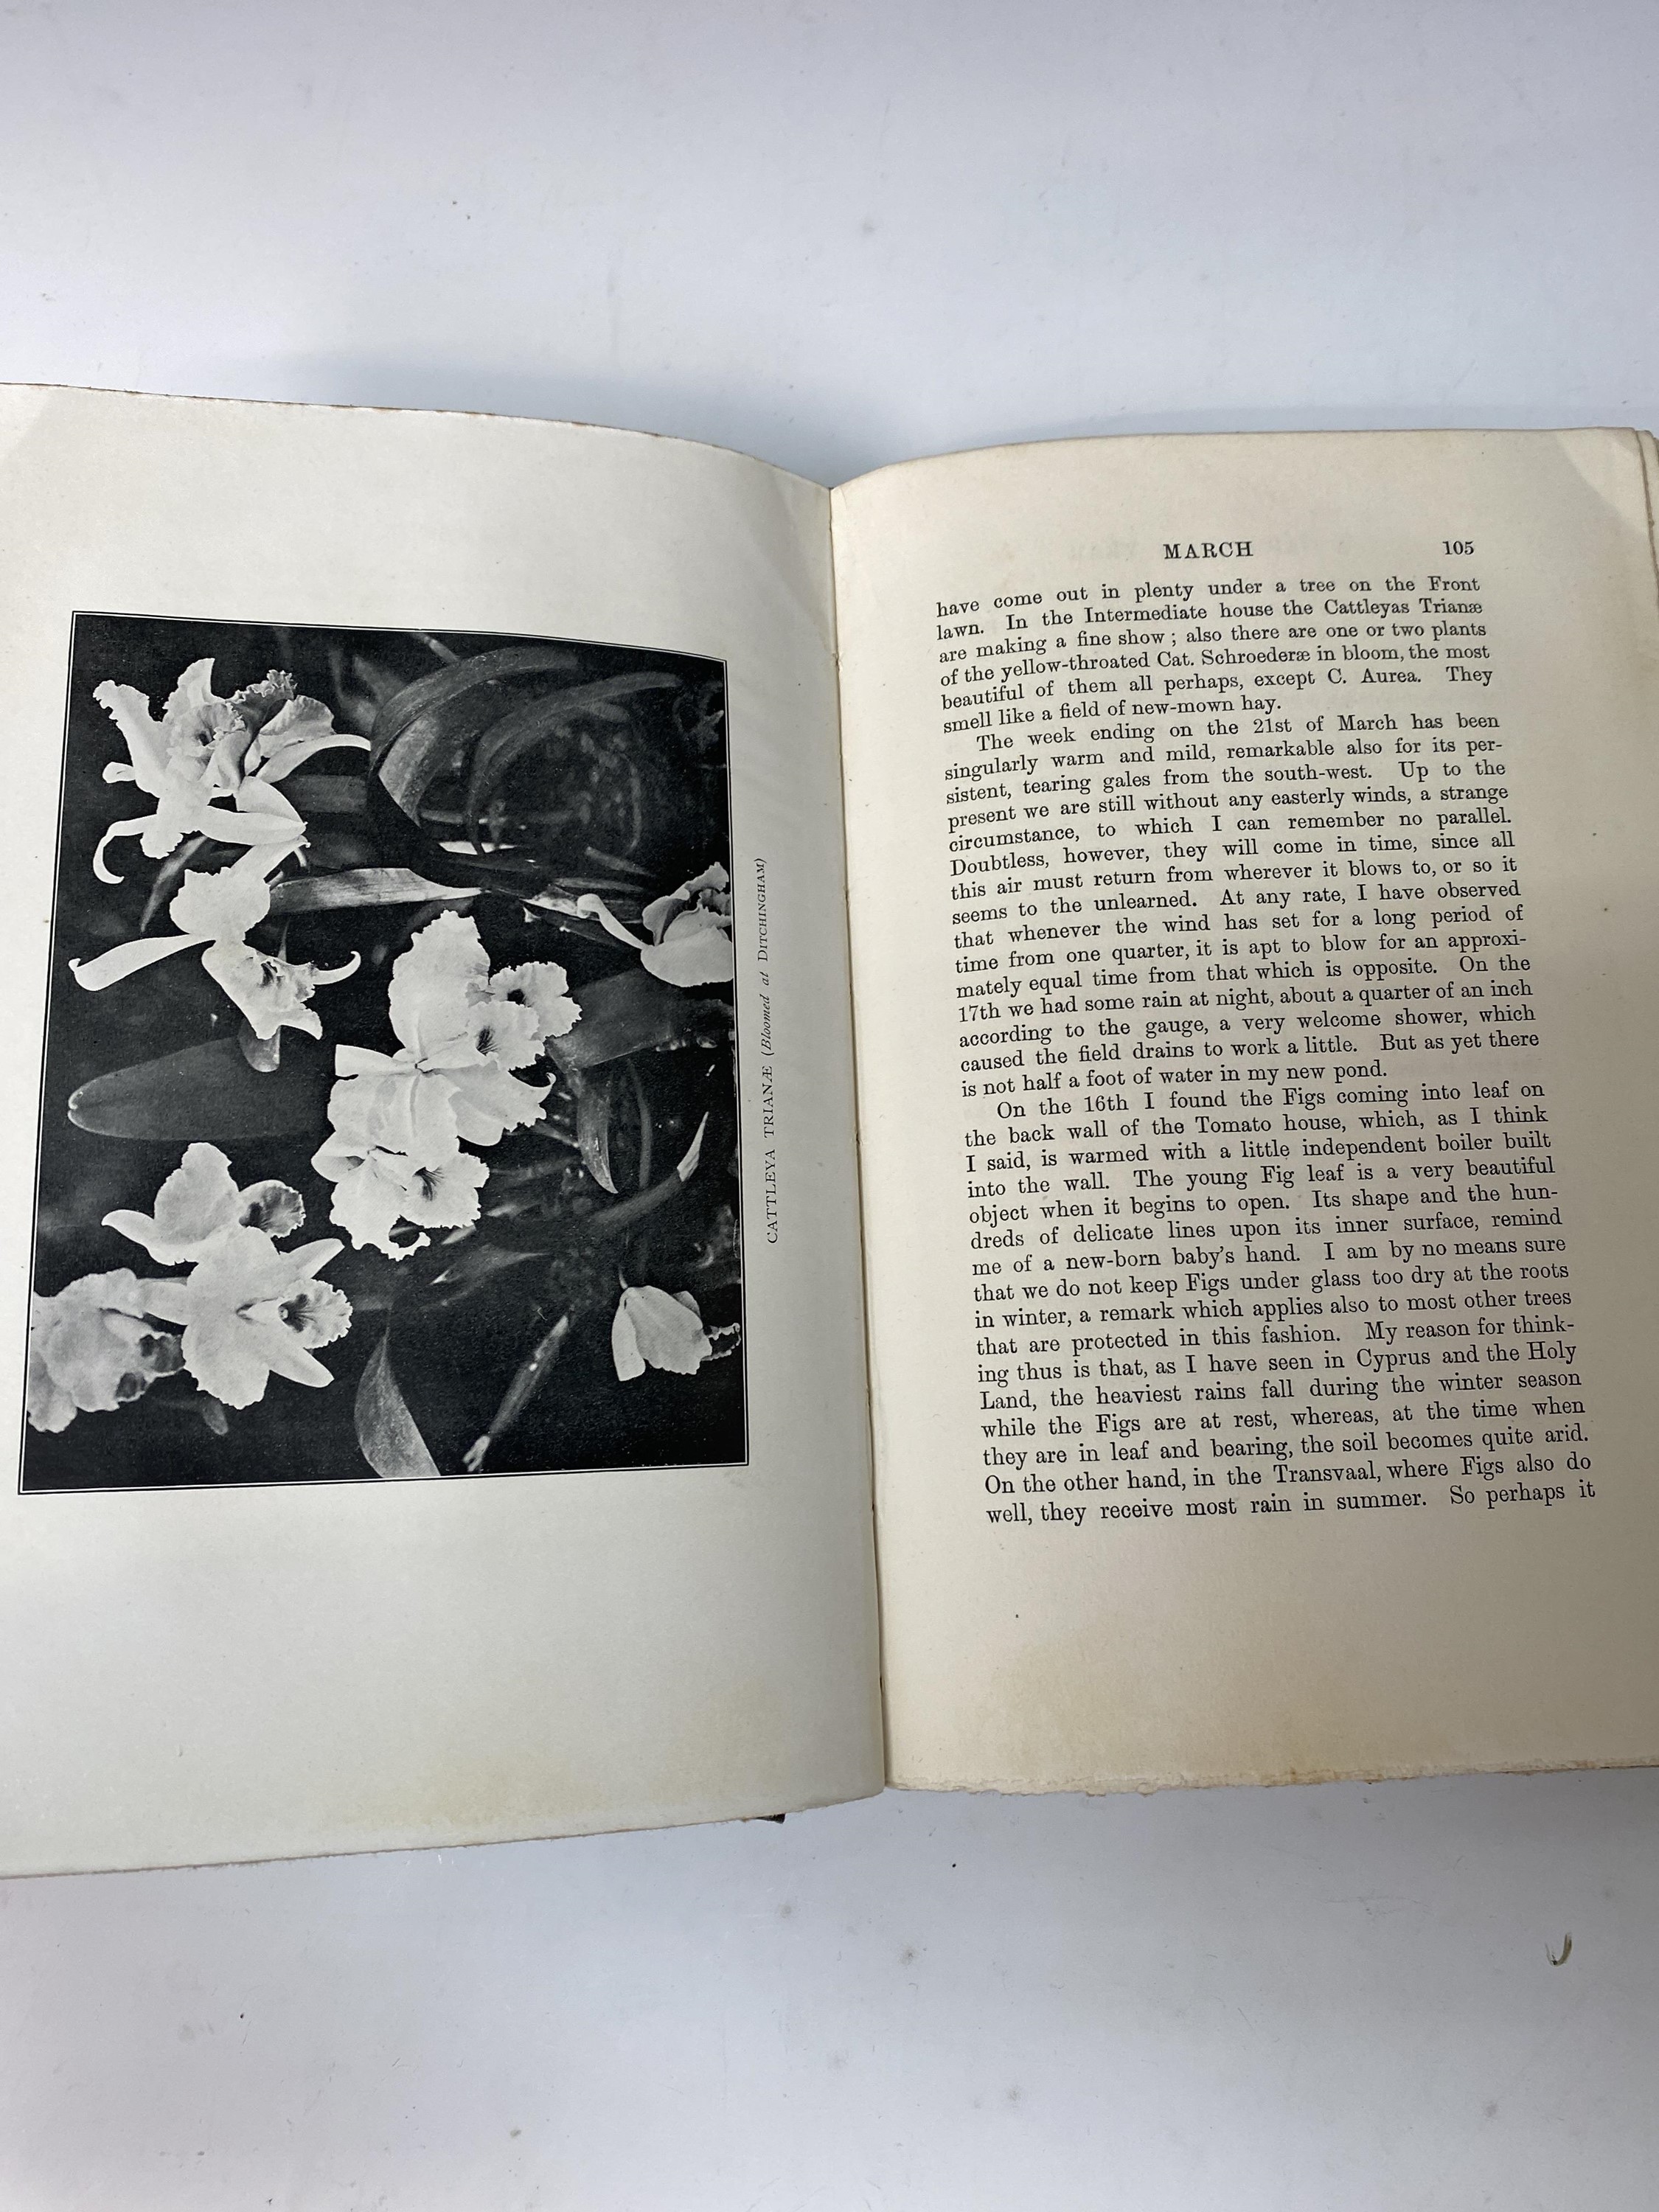 H. RIDER HAGGARD. 'A Gardener's Year.' First edition, original cloth, slight fading to cloth, - Image 4 of 4